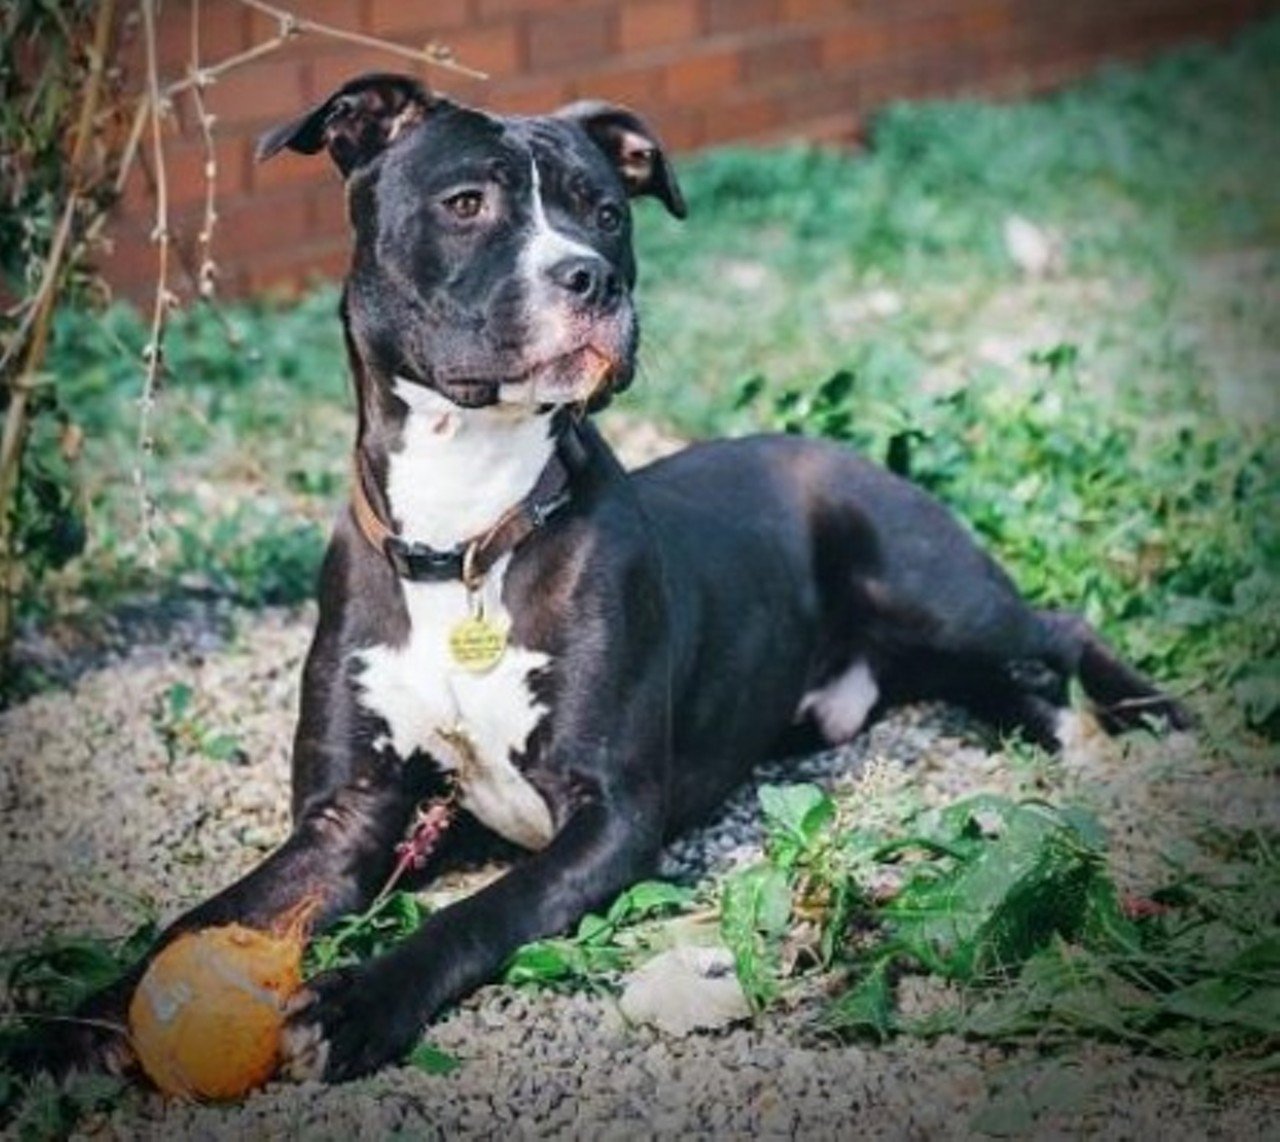  Billy
1-year-old, Terrier/American Pit Bull mix